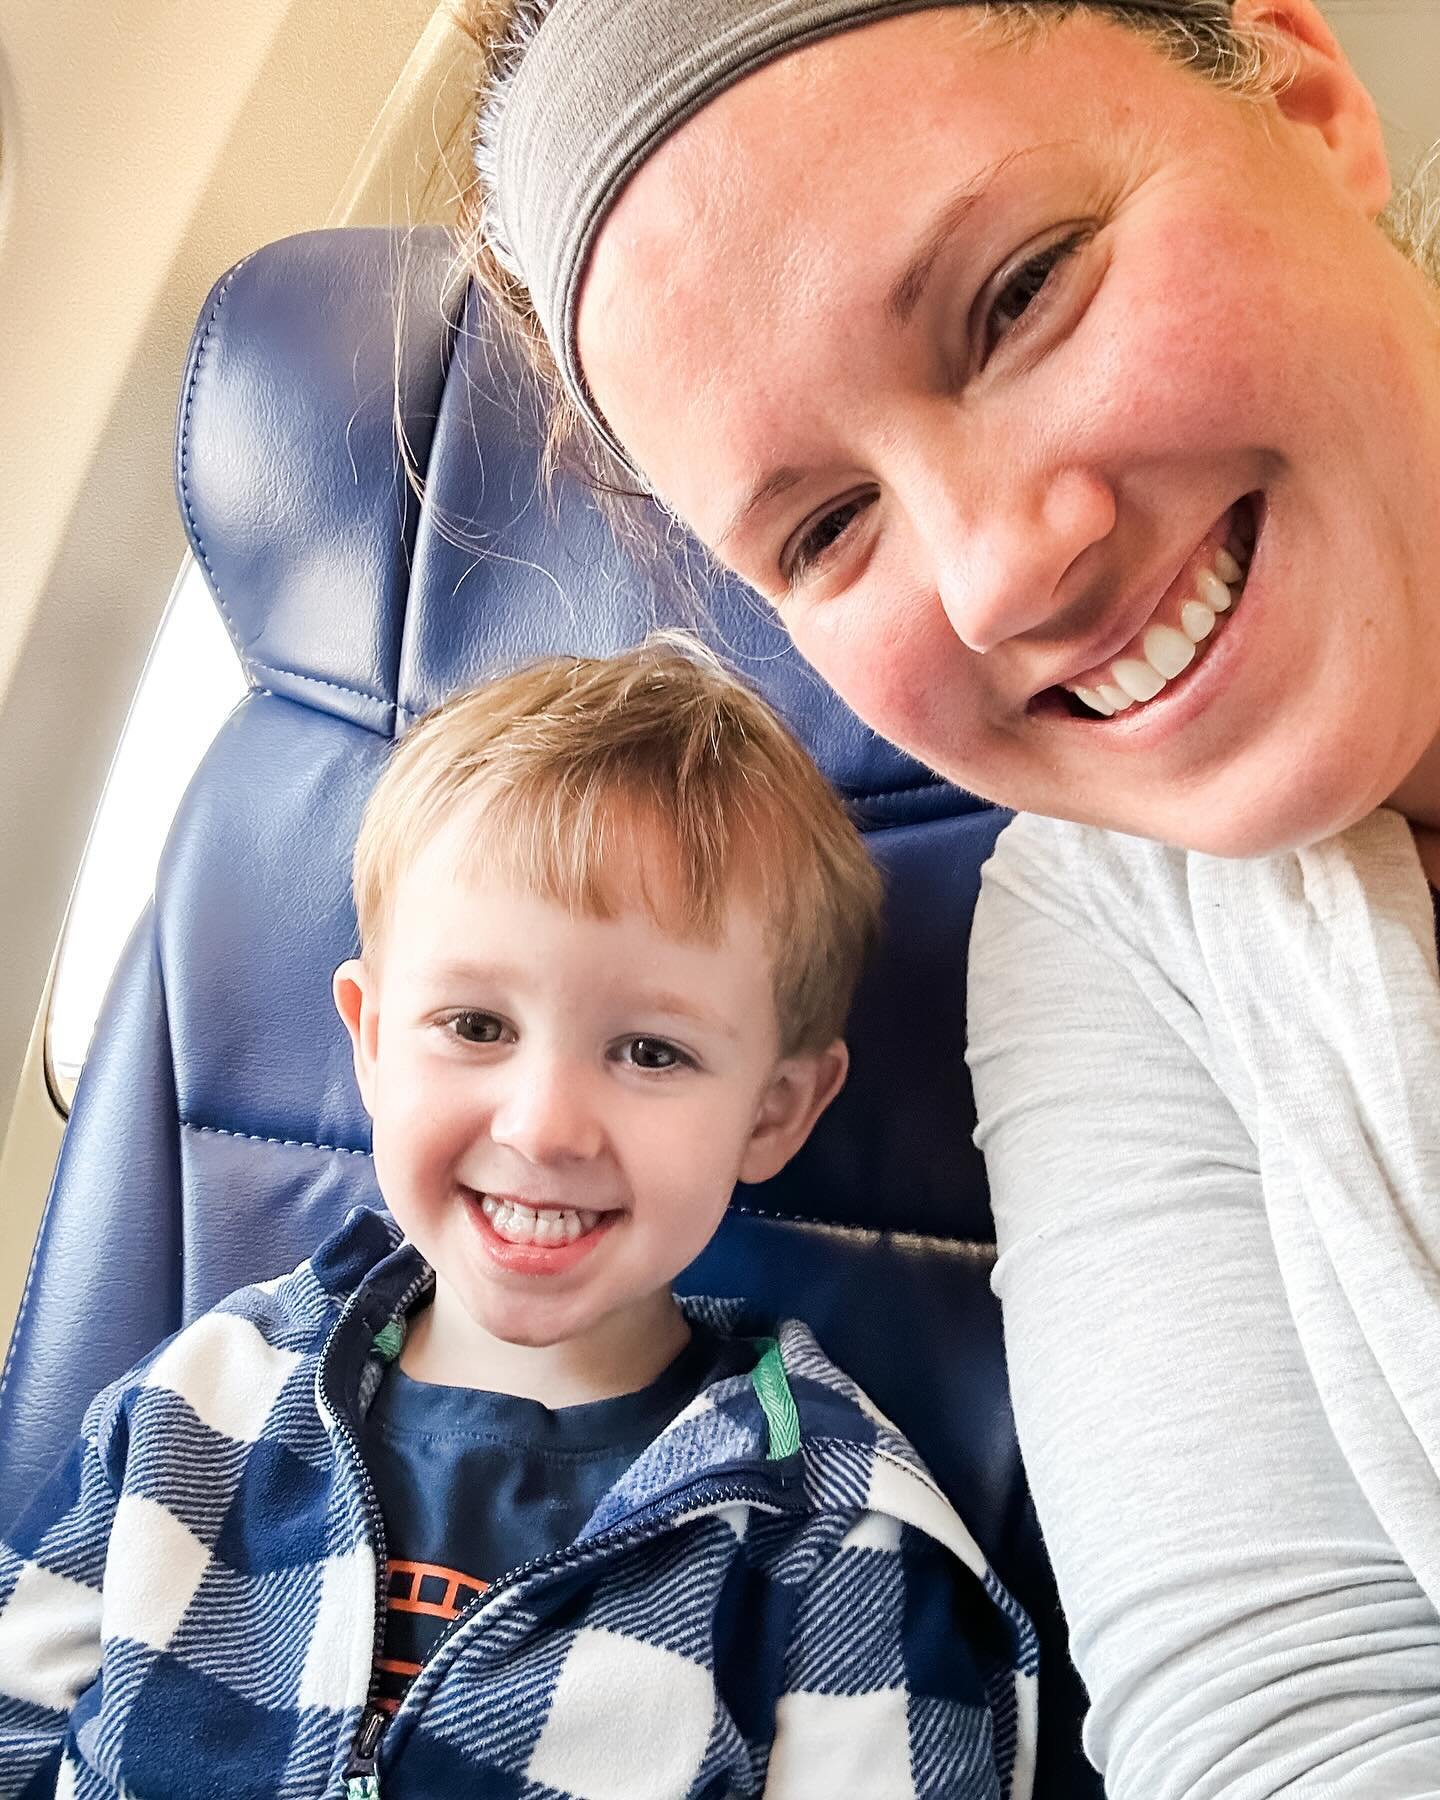 I guess it&rsquo;s about time for a personal update&hellip;

This little dude and I flew to North Carolina this past week and bought a house! In the last month, we&rsquo;ve sold our house in Illinois, bought a house in NC, and are now making our way 